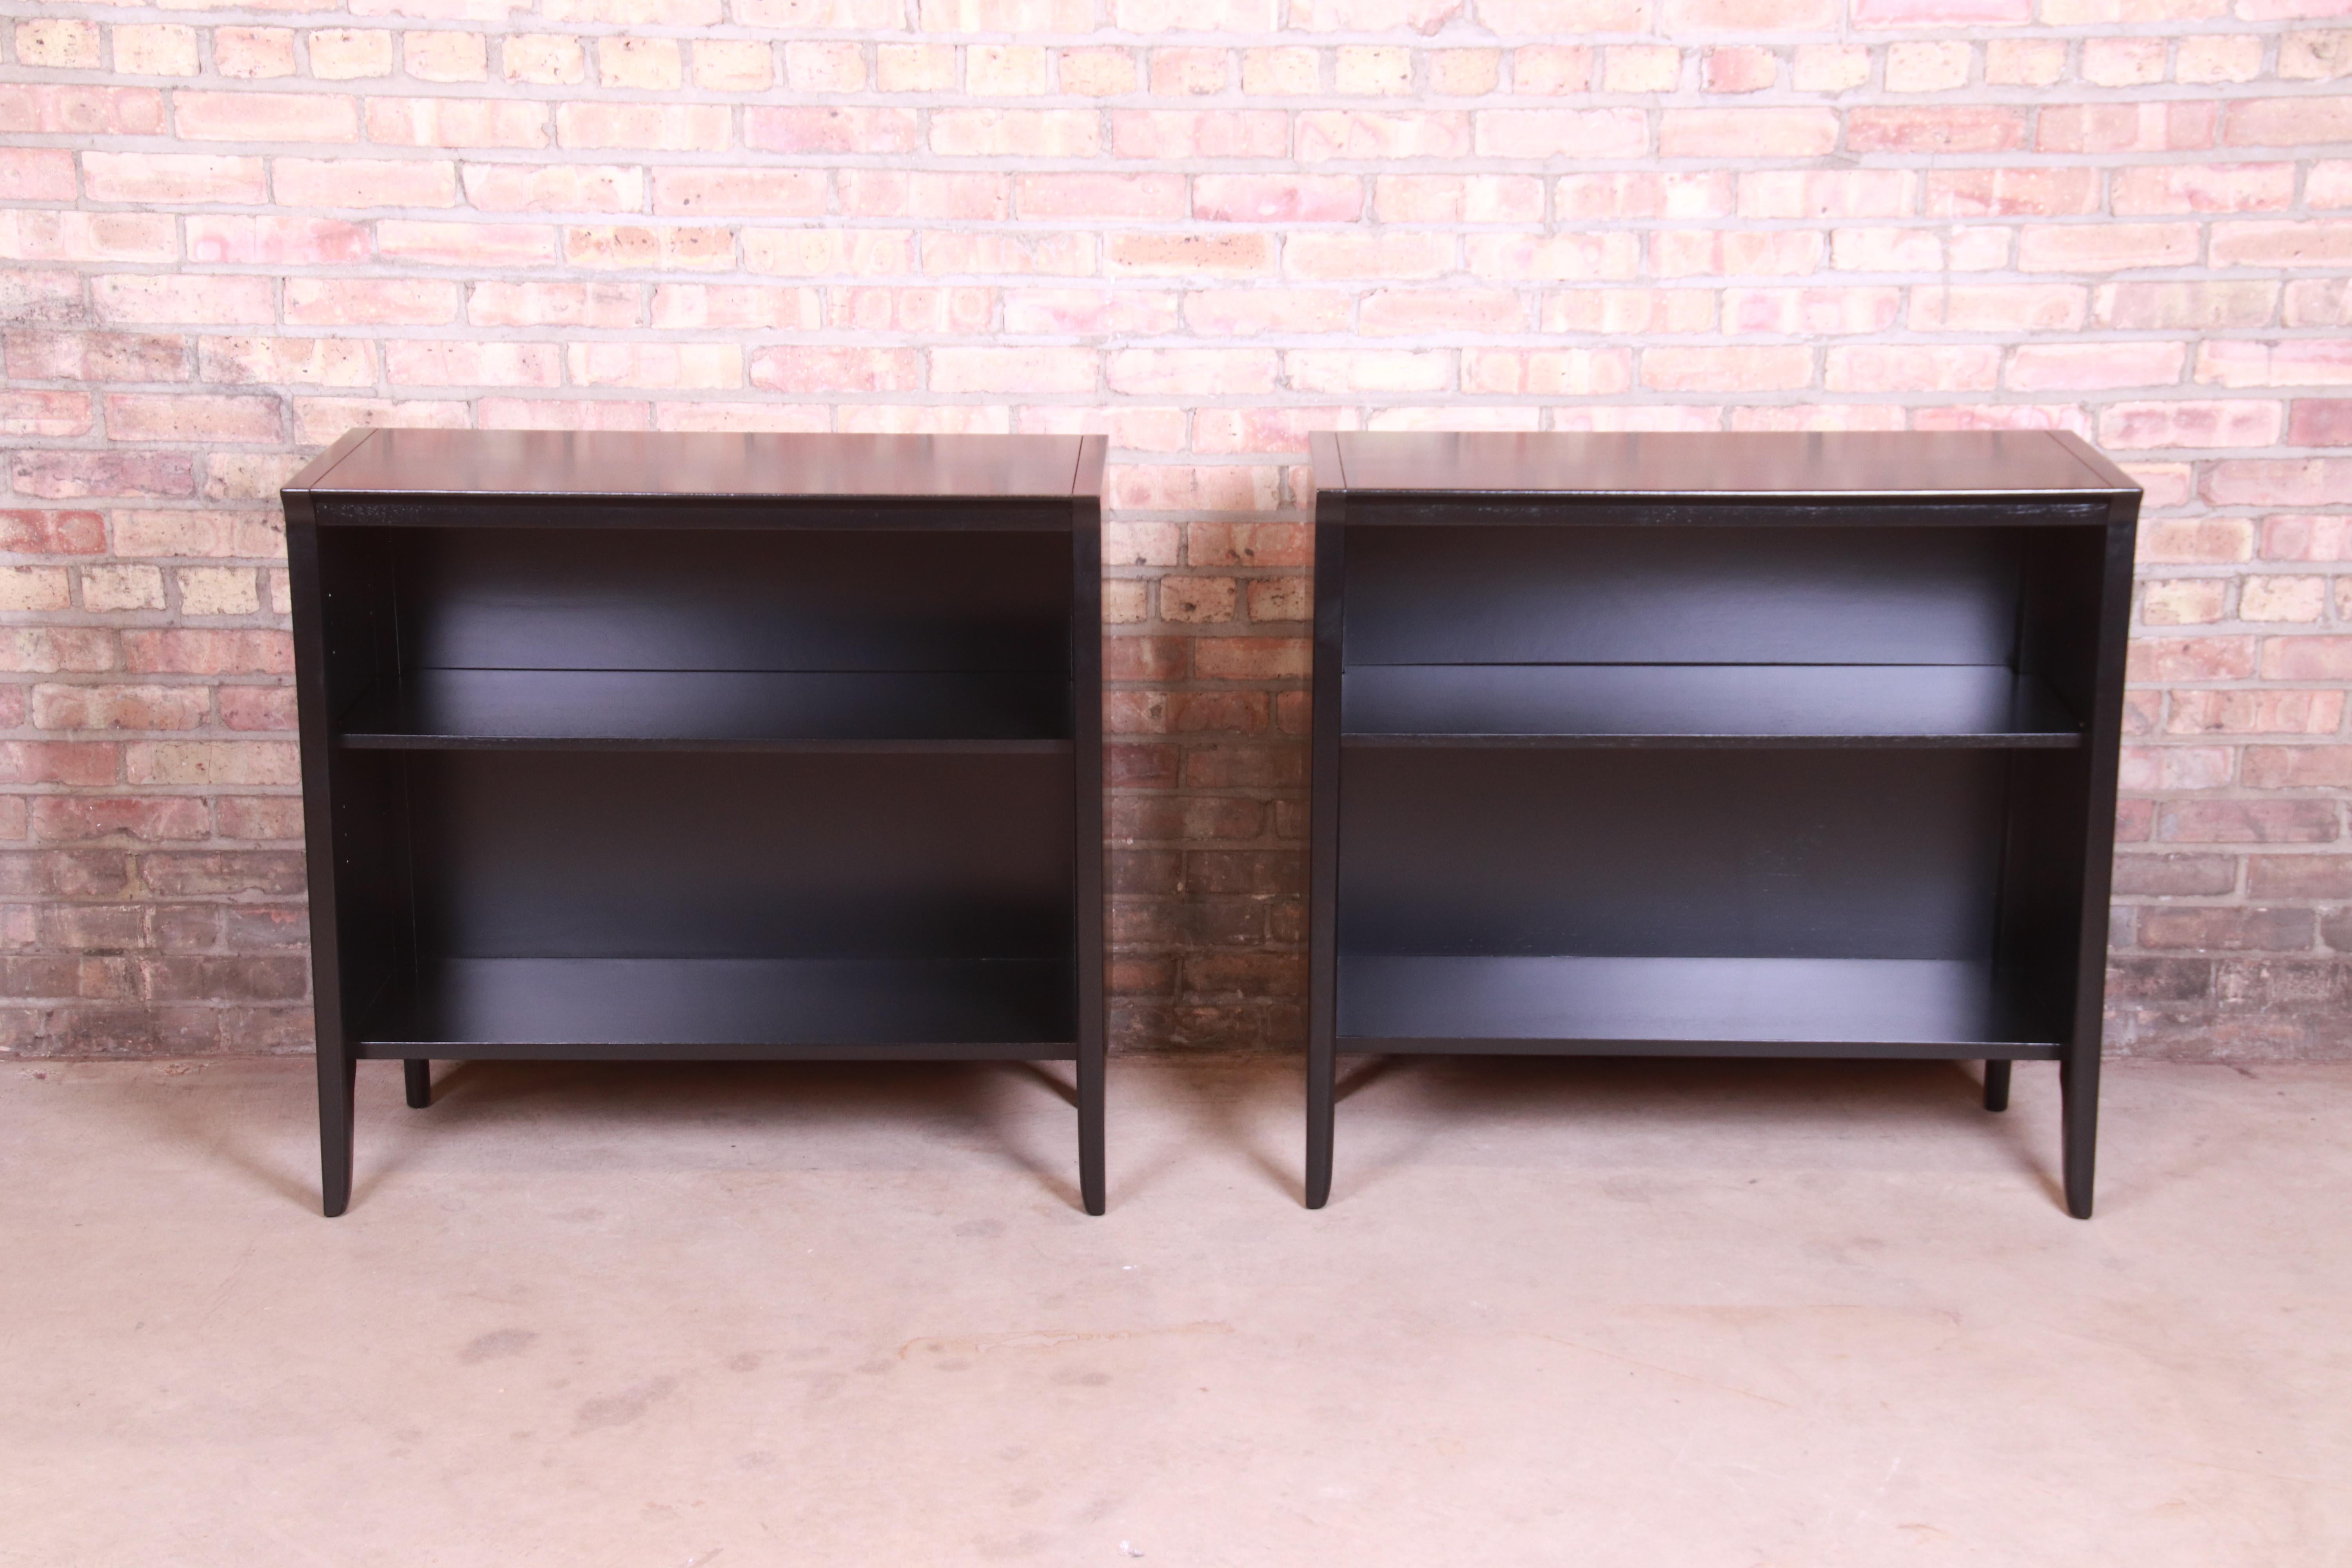 An exceptional pair of Mid-Century Modern black lacquered walnut bookcases

By John Van Koert for Drexel 